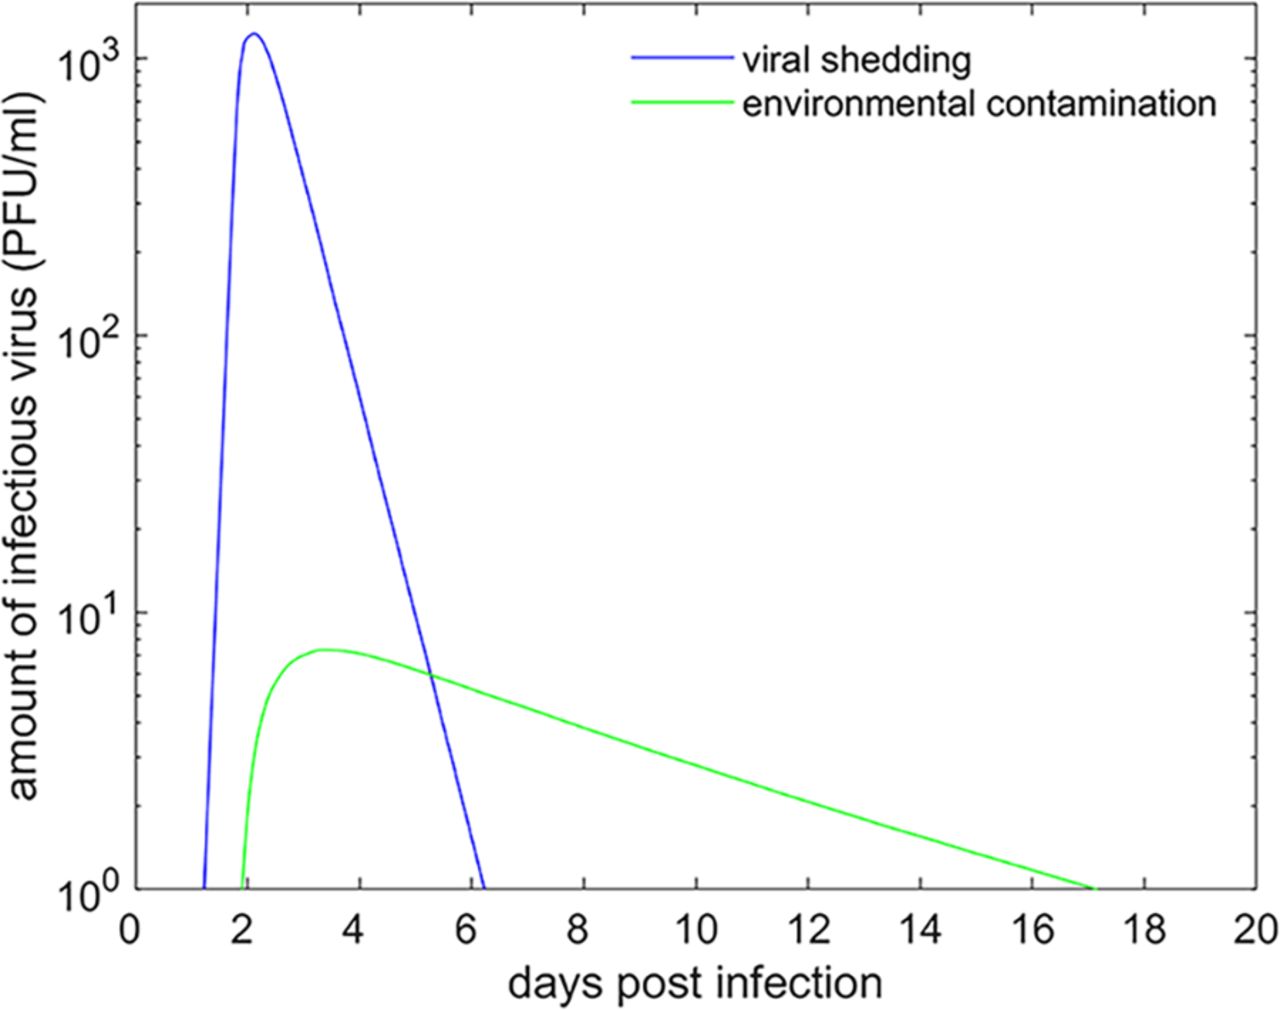 FIG 5 Comparison of predicted viral shedding (blue line) and environmental contamination (green line) for an individual bovine infected with foot-and-mouth disease virus. The figure shows the posterior median for the level of viral shedding, computed using equation 1 (see the Materials and Methods section), and the posterior median for the level of environmental contamination, computed using equation 2.